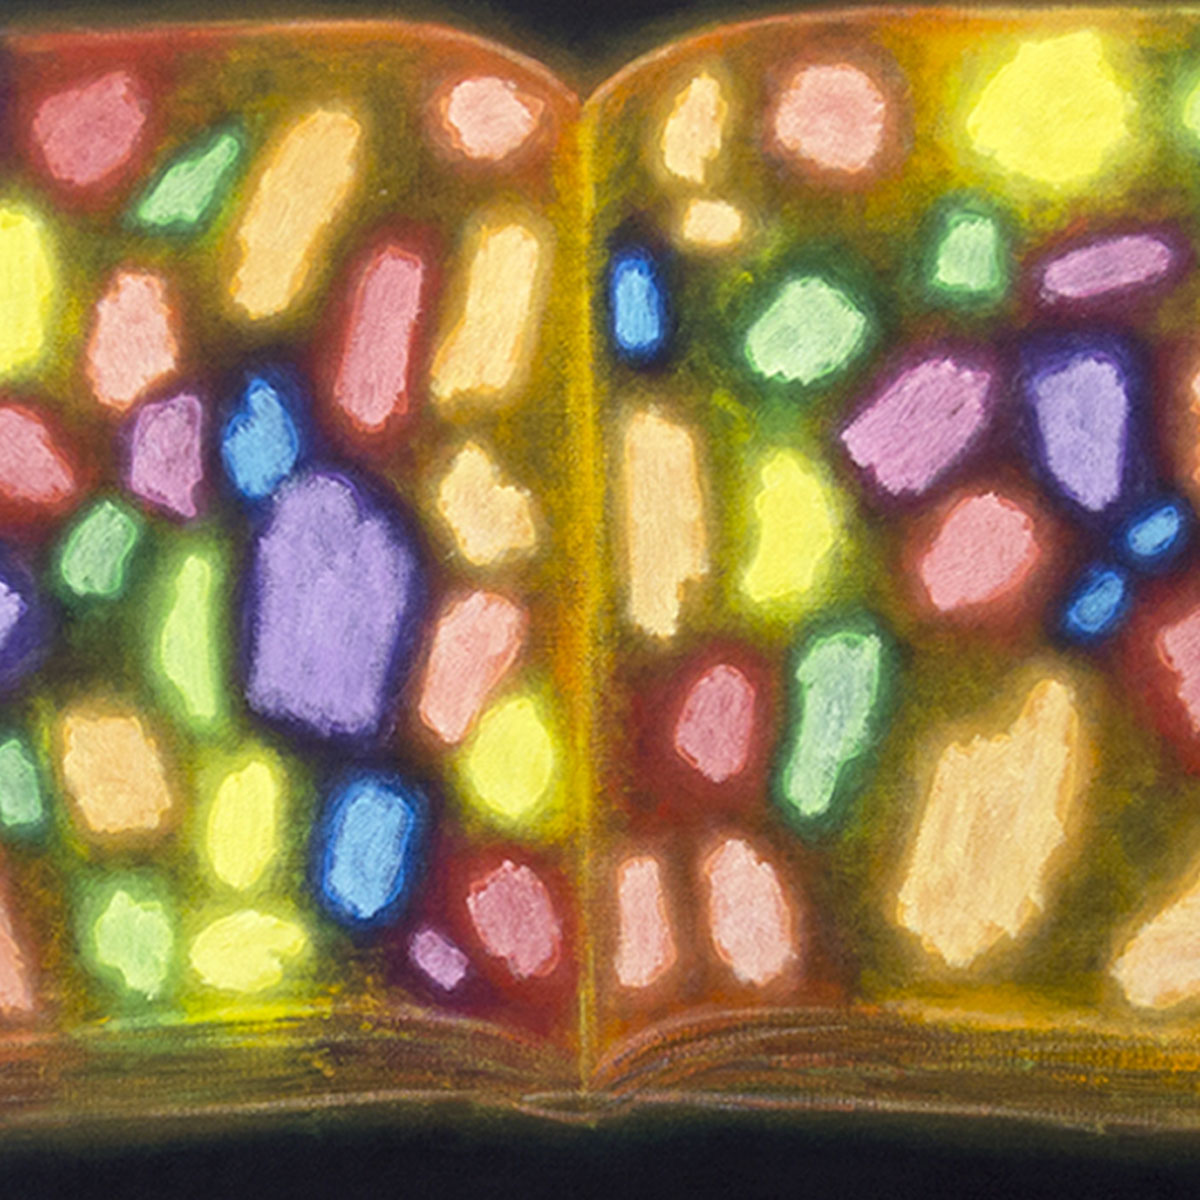 An open yellow book filled with glowing spots of paint in various colors against a black background